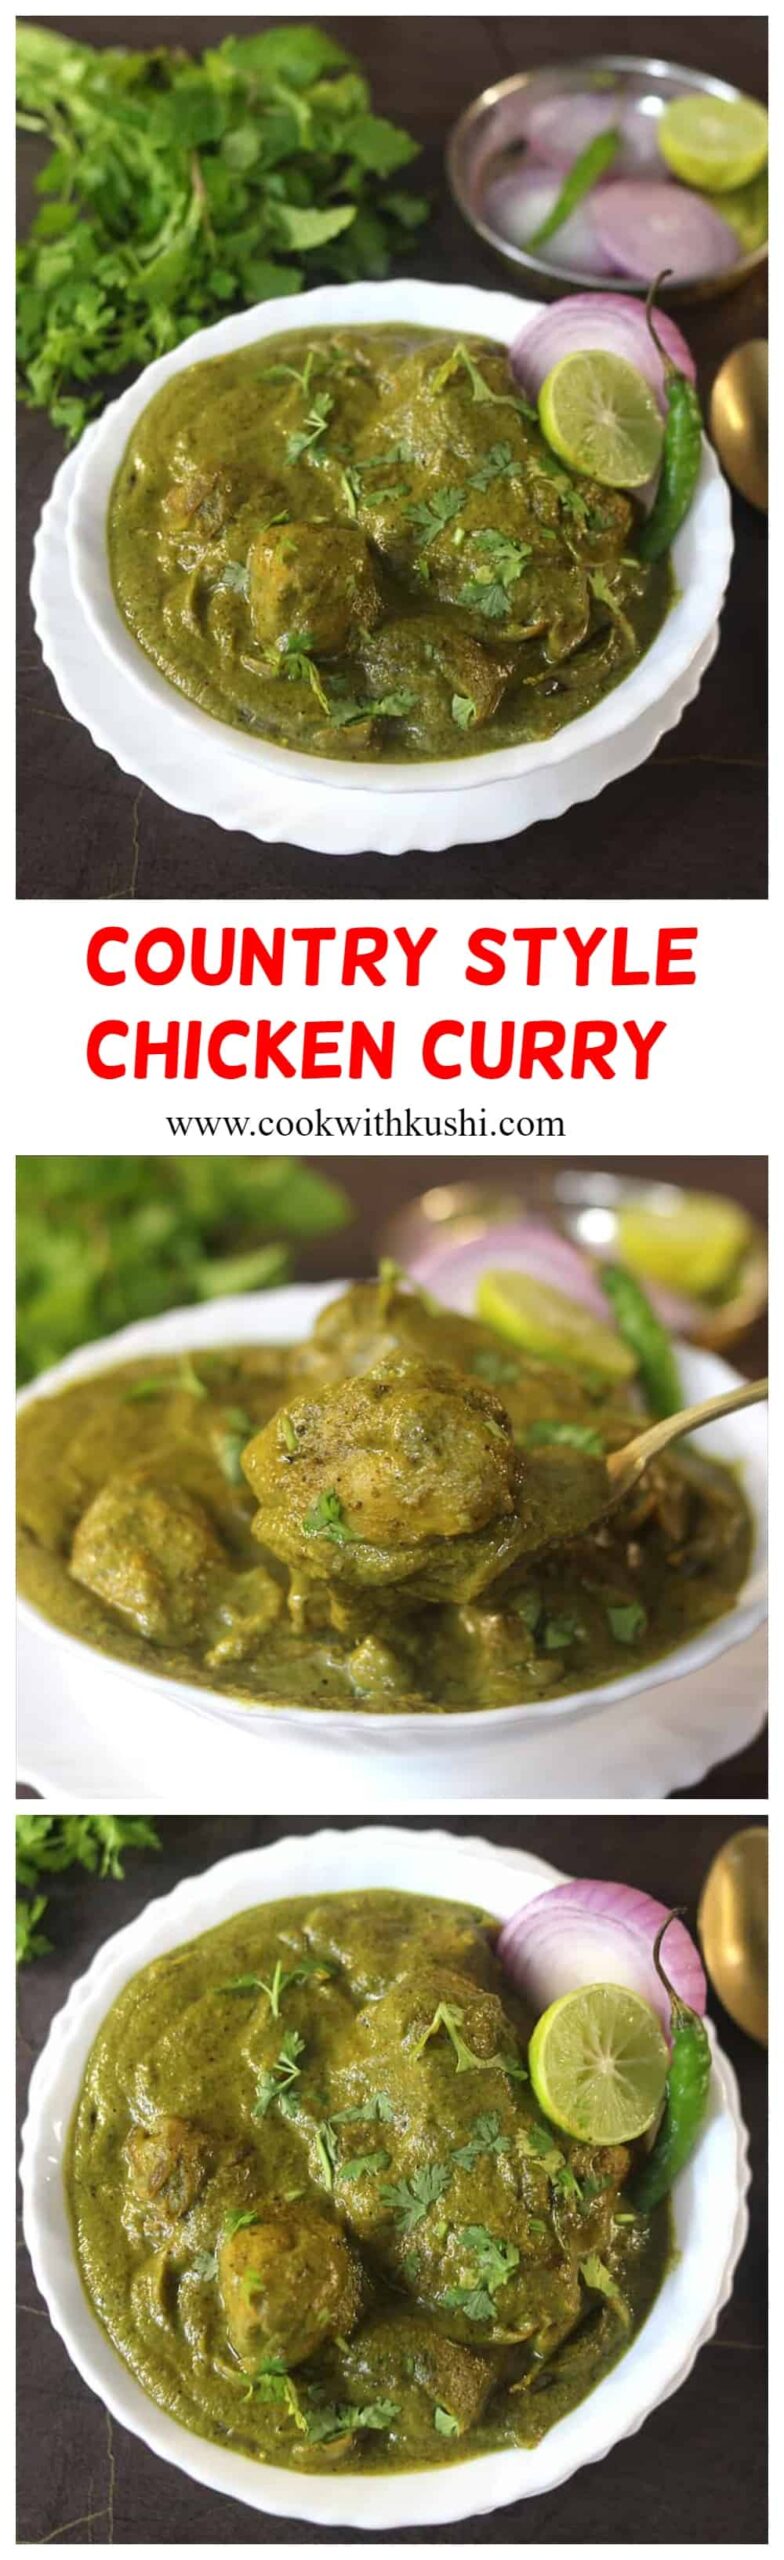 How to make the best village country style chicken curry at home 